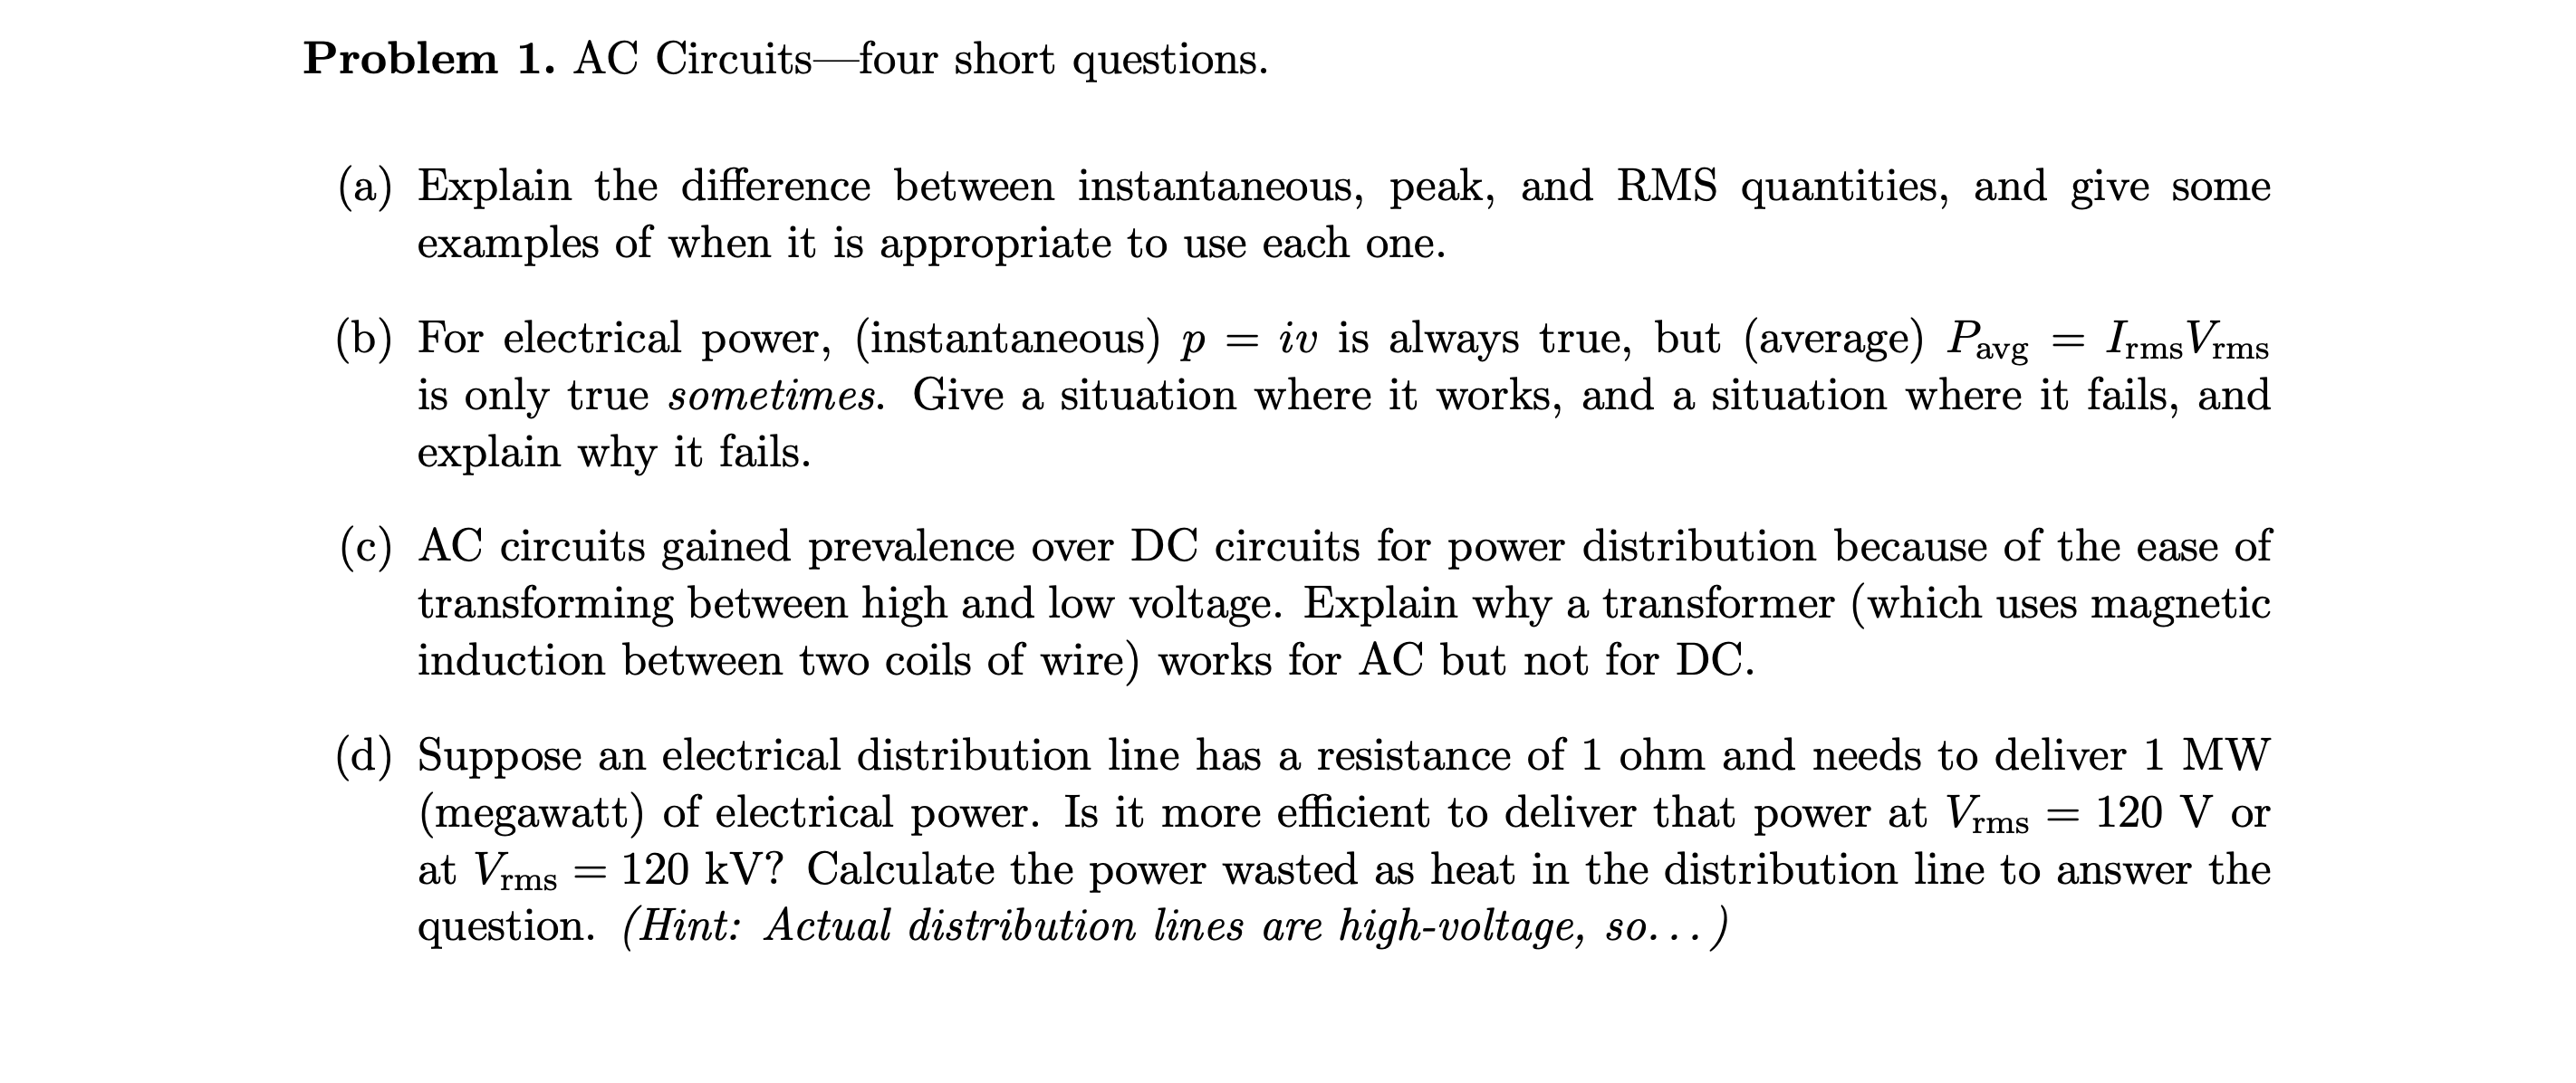 (c) AC circuits gained prevalence over DC circuits for power distribution because of the ease of
transforming between high and low voltage. Explain why a transformer (which uses magnetic
induction between two coils of wire) works for AC but not for DC.
